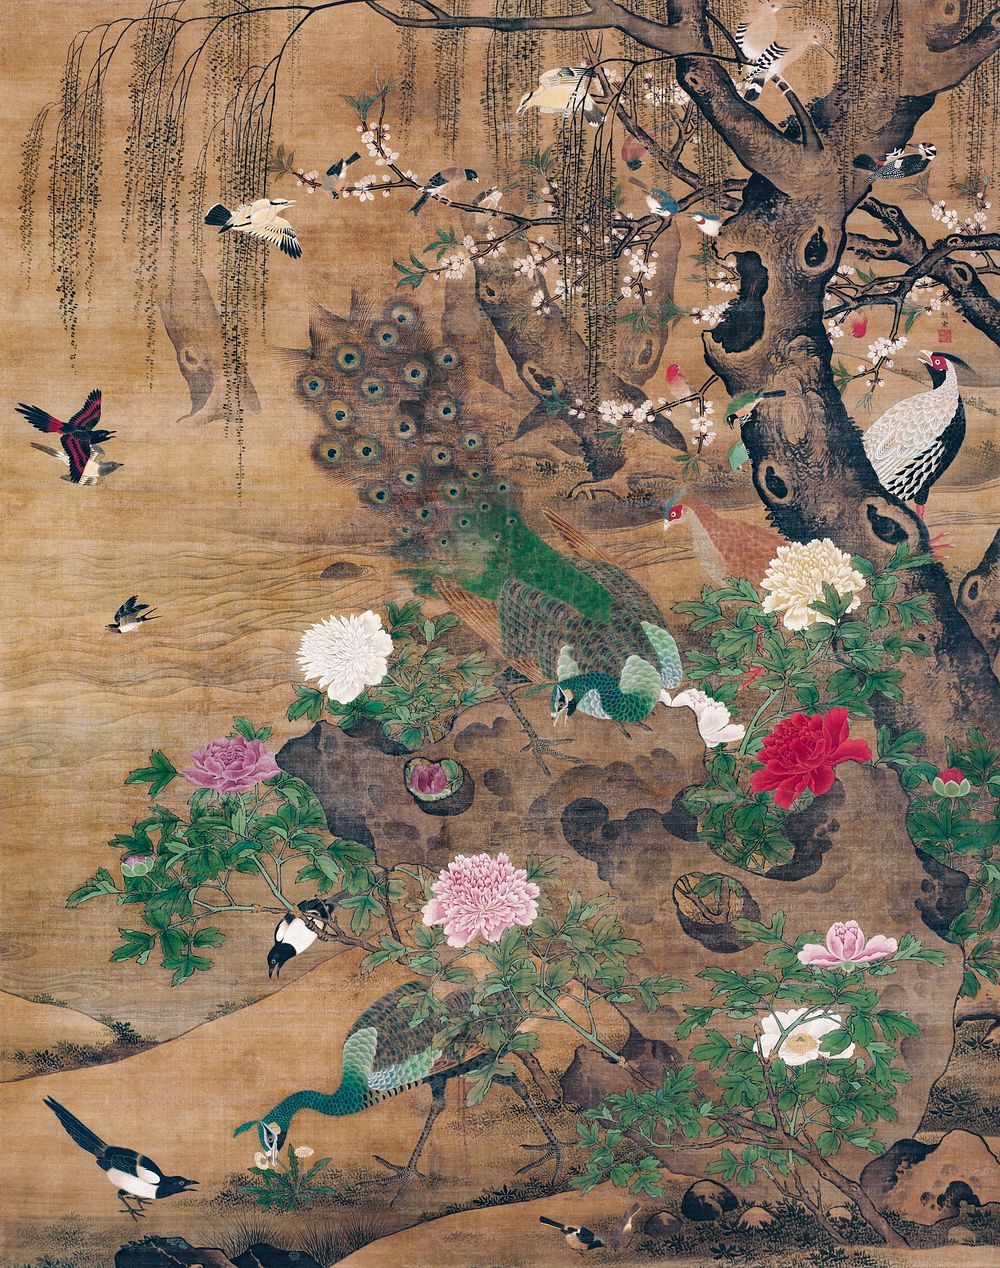 Chinese birds and flowers (1430-1500) vintage painting by Yin Hong. Original public domain image from The Cleveland Museum…